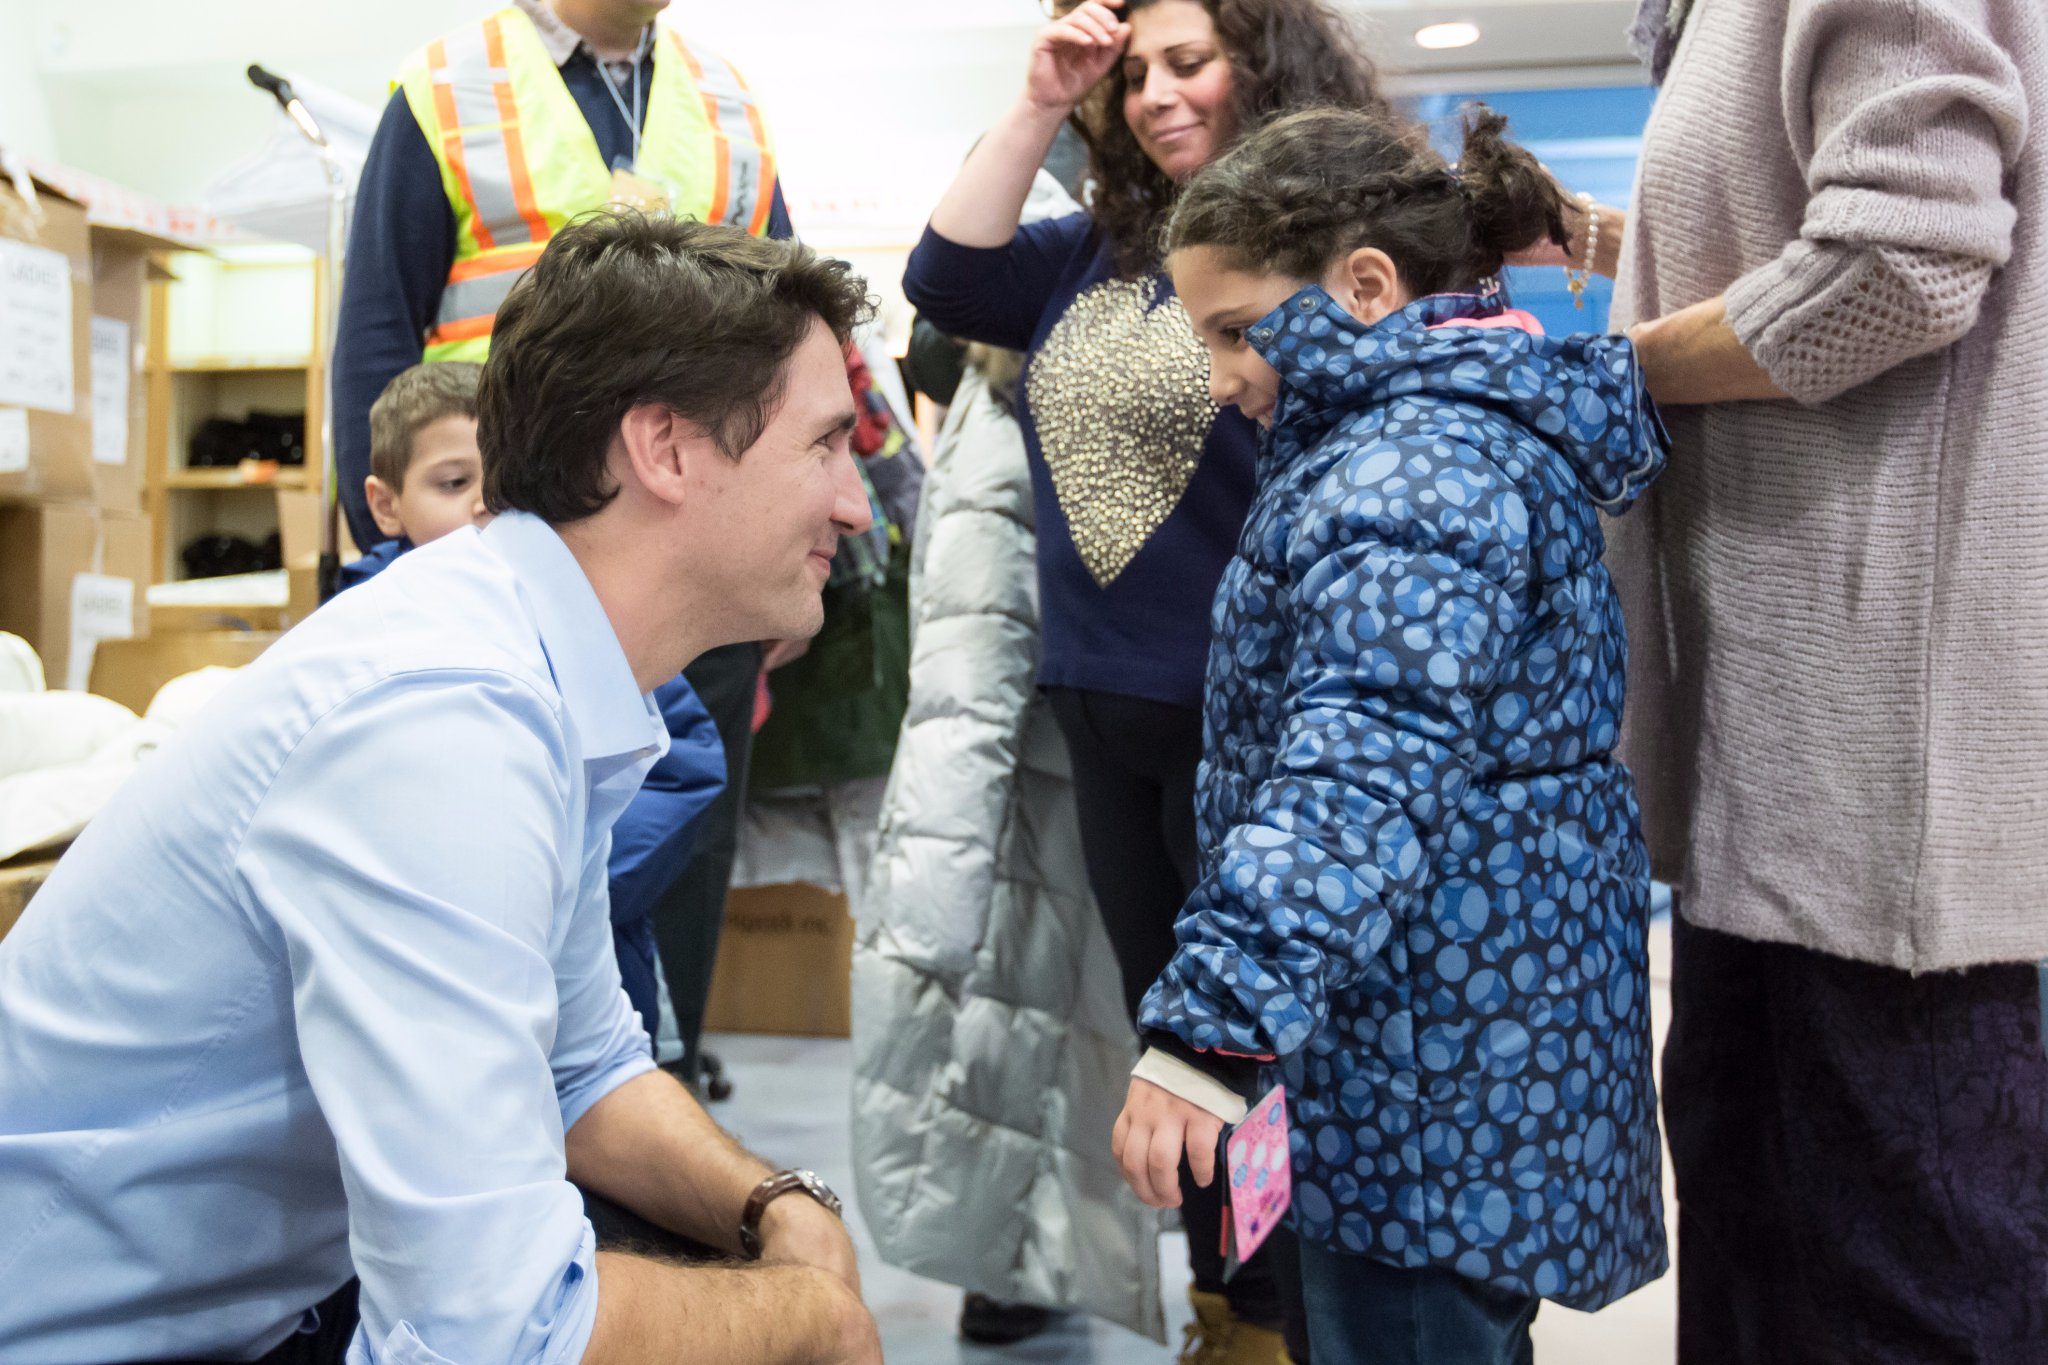 Canada’s Trudeau to immigrants: You are welcome here